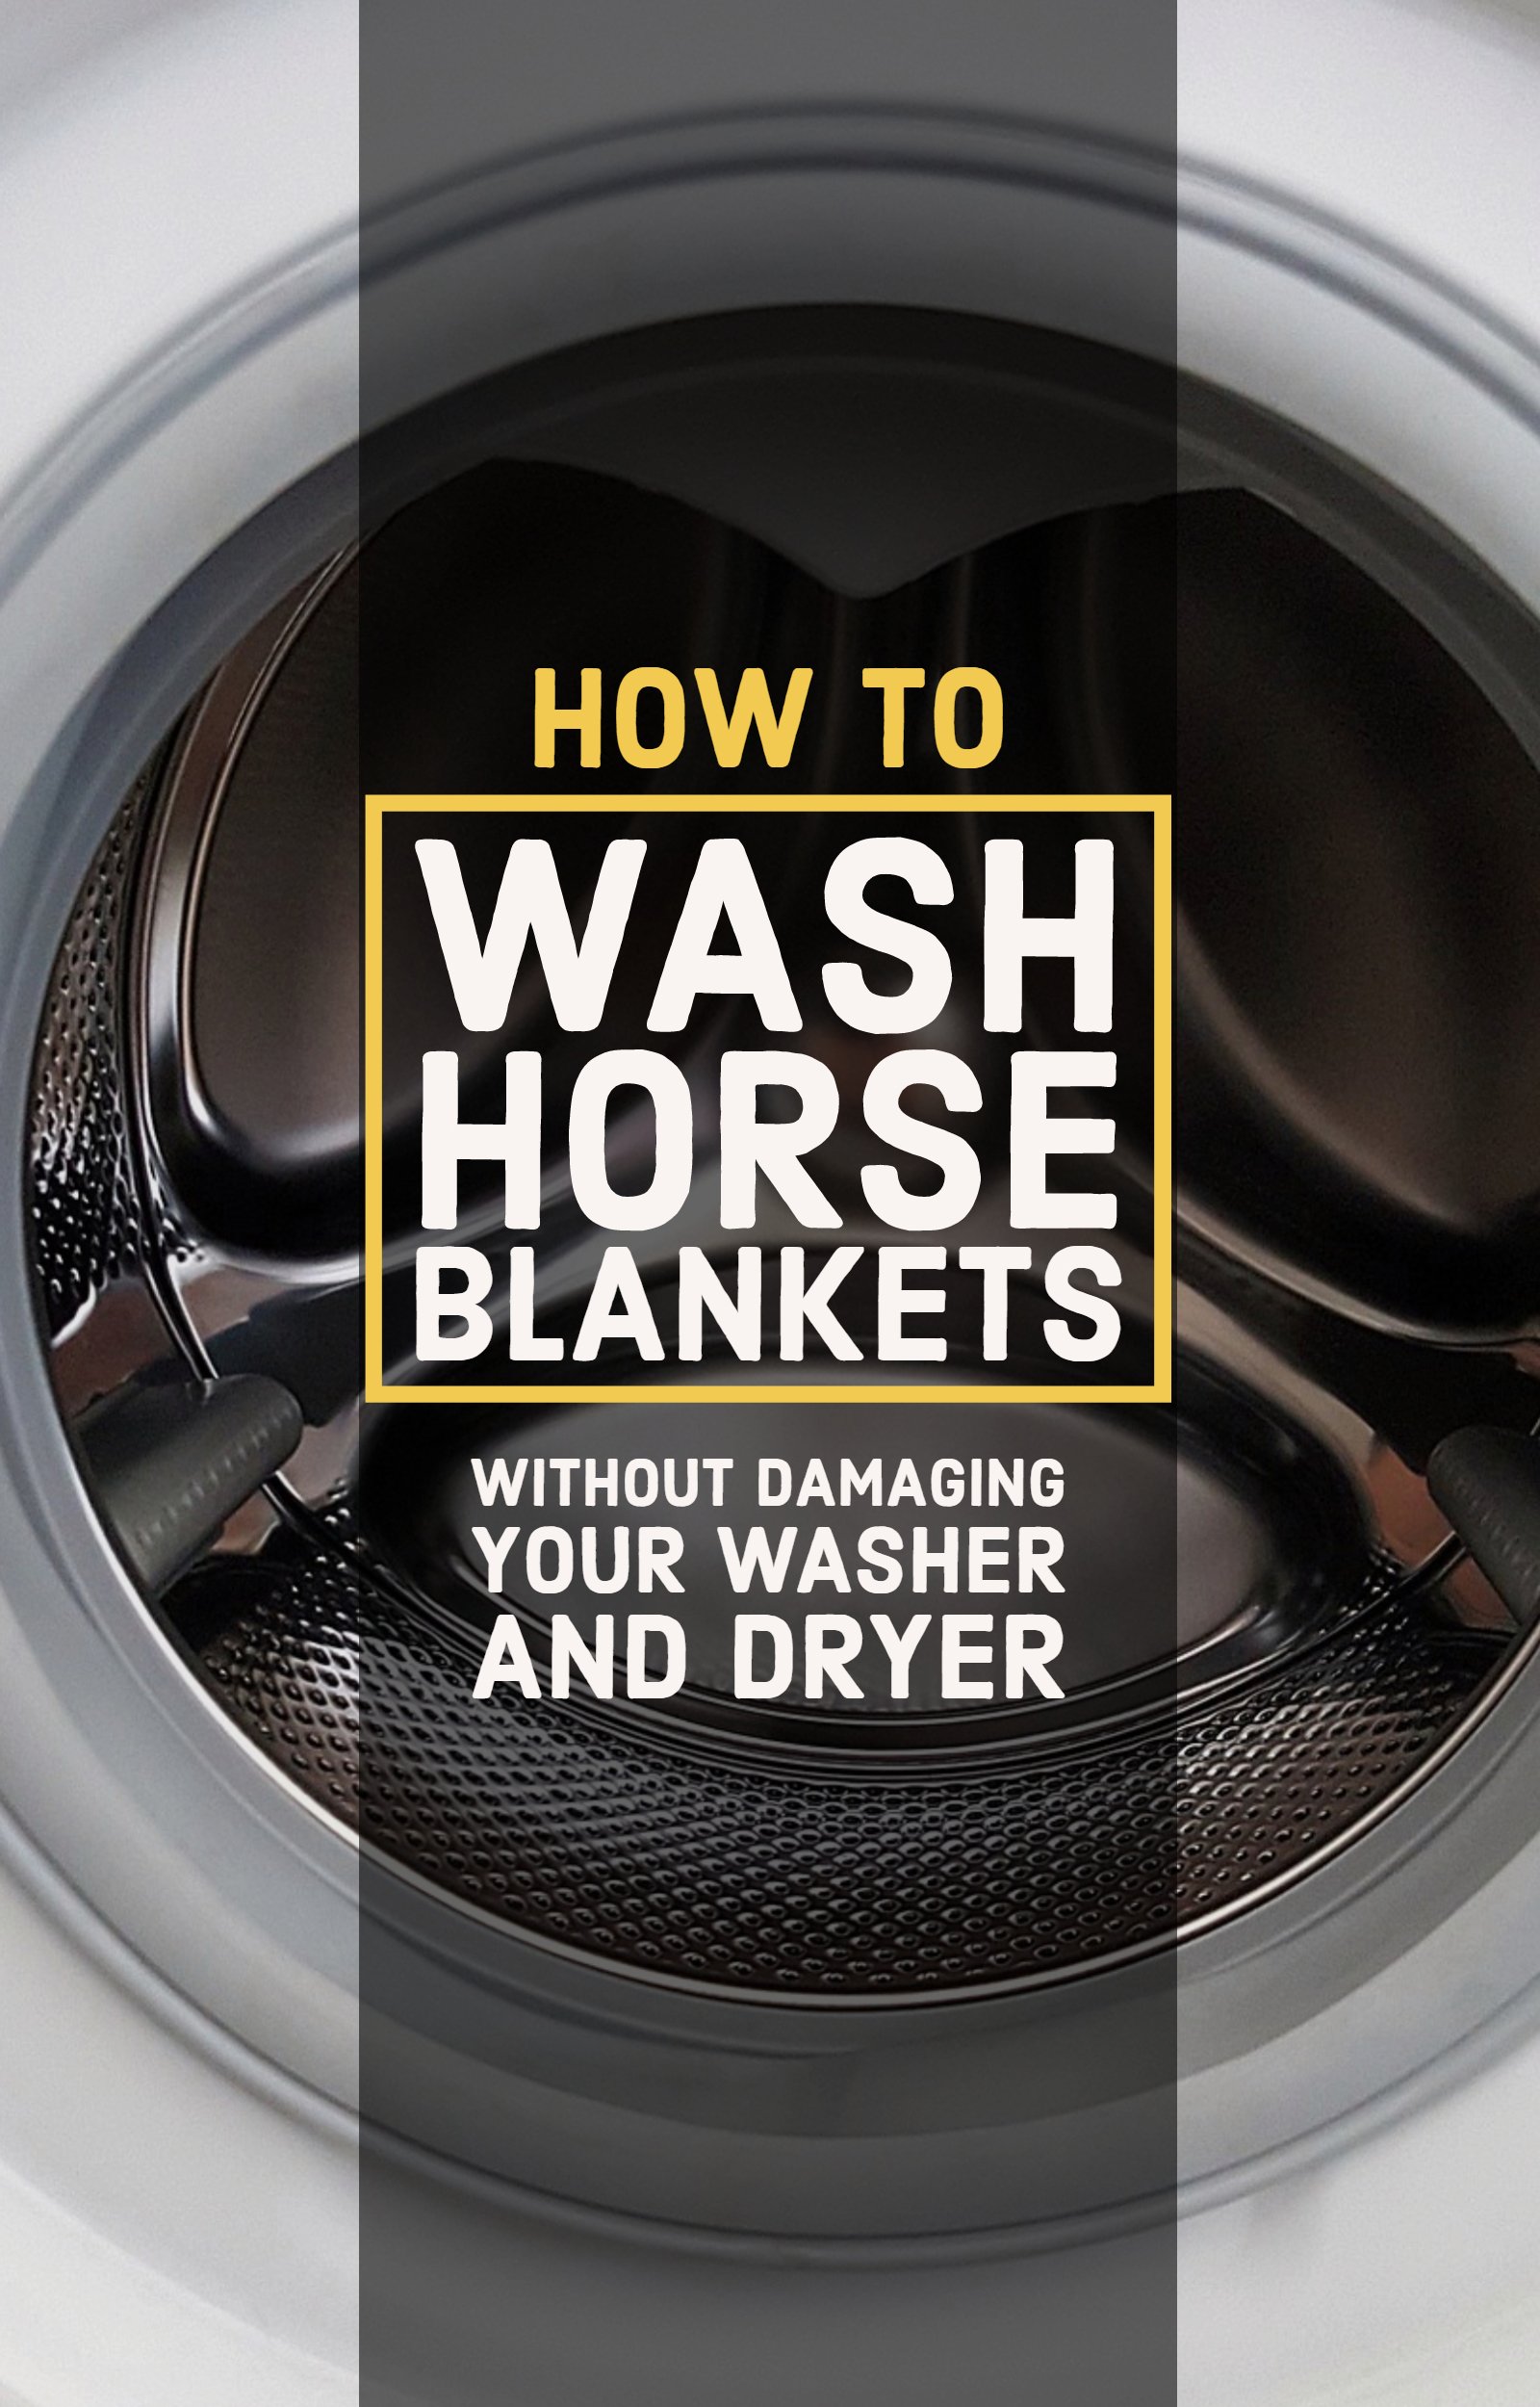 How to wash a horse blanket at home without damaging your washer and dryer